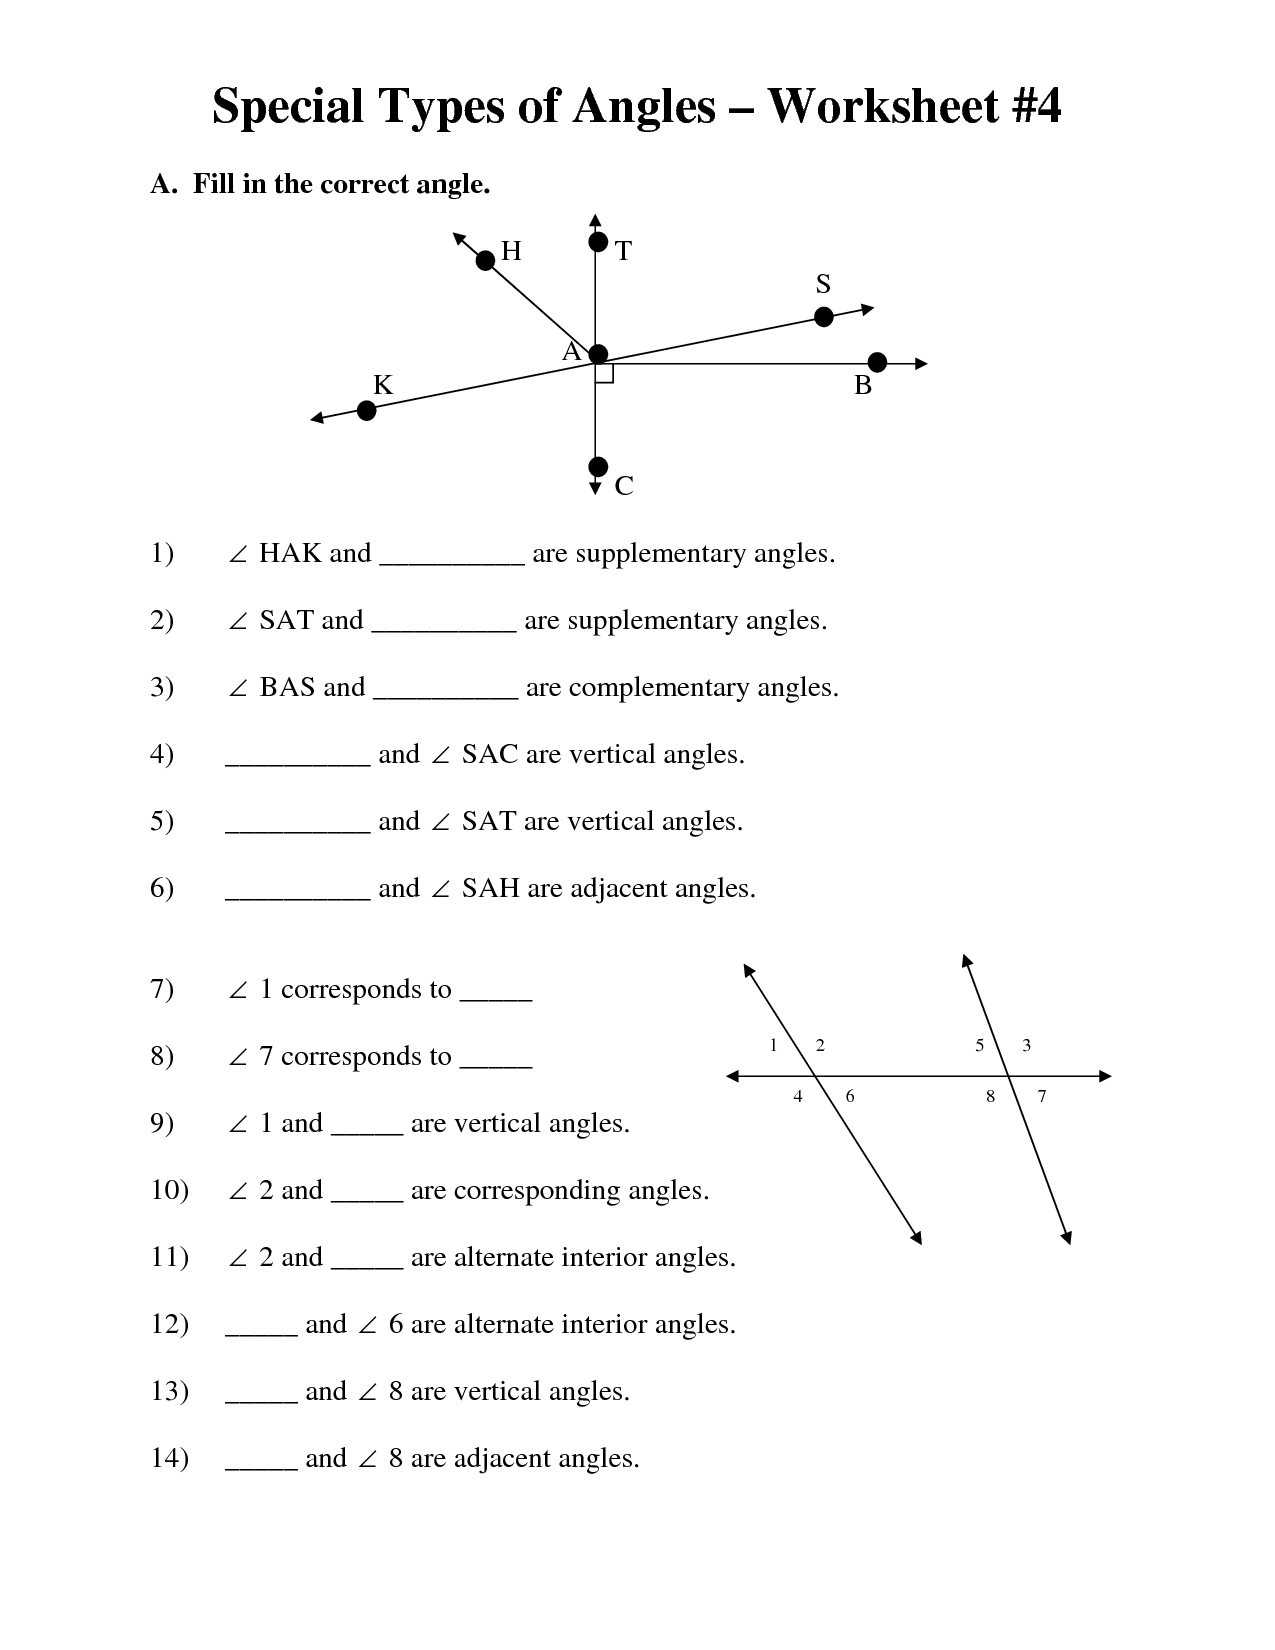 Different Types of Angles Worksheet Image